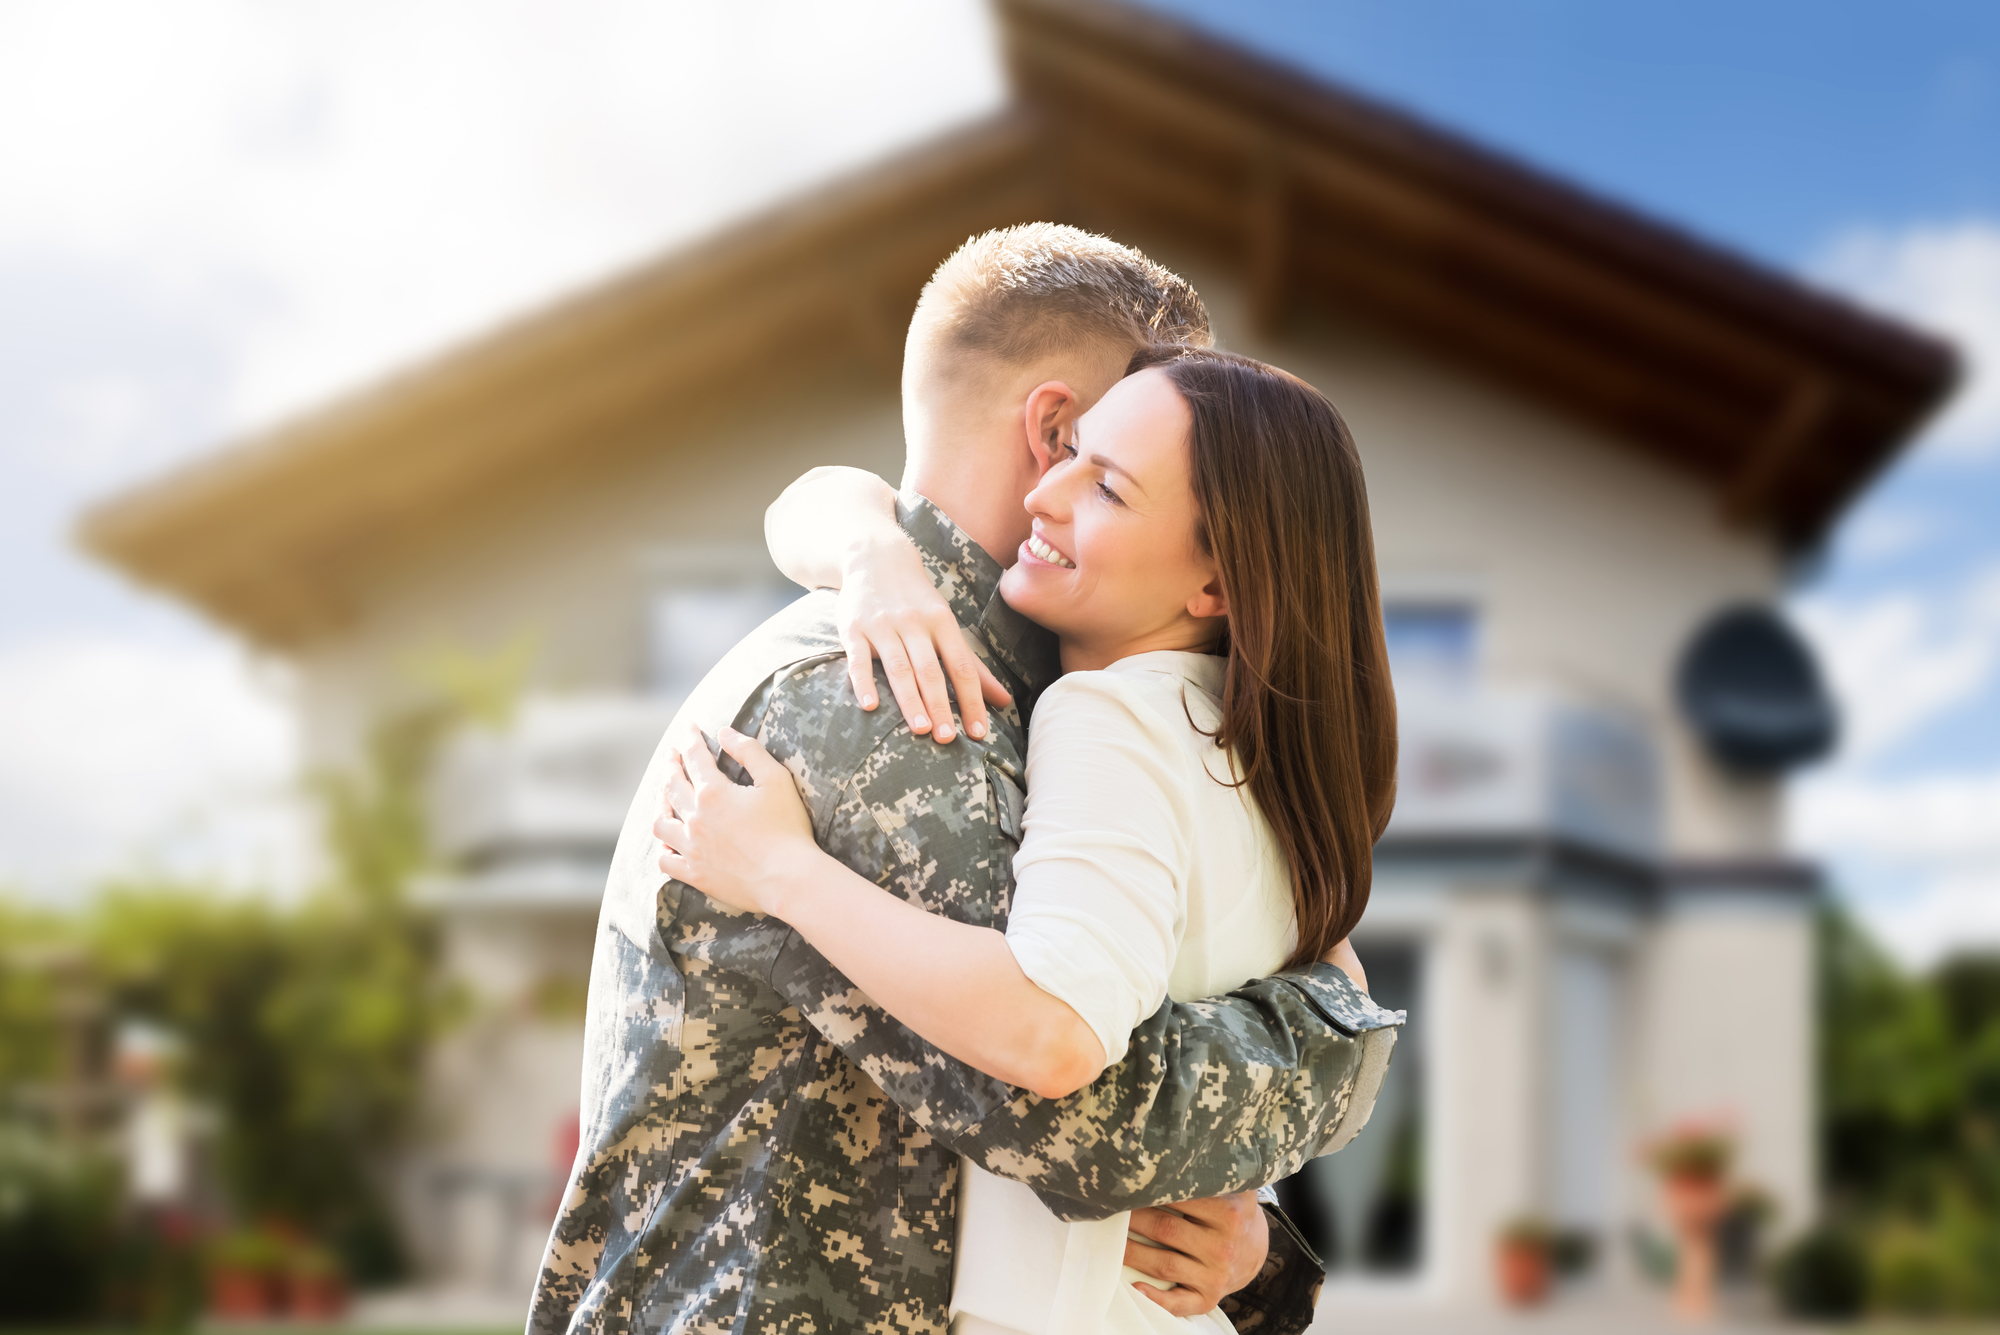 An army soldier hugs their significant other in front of a house.